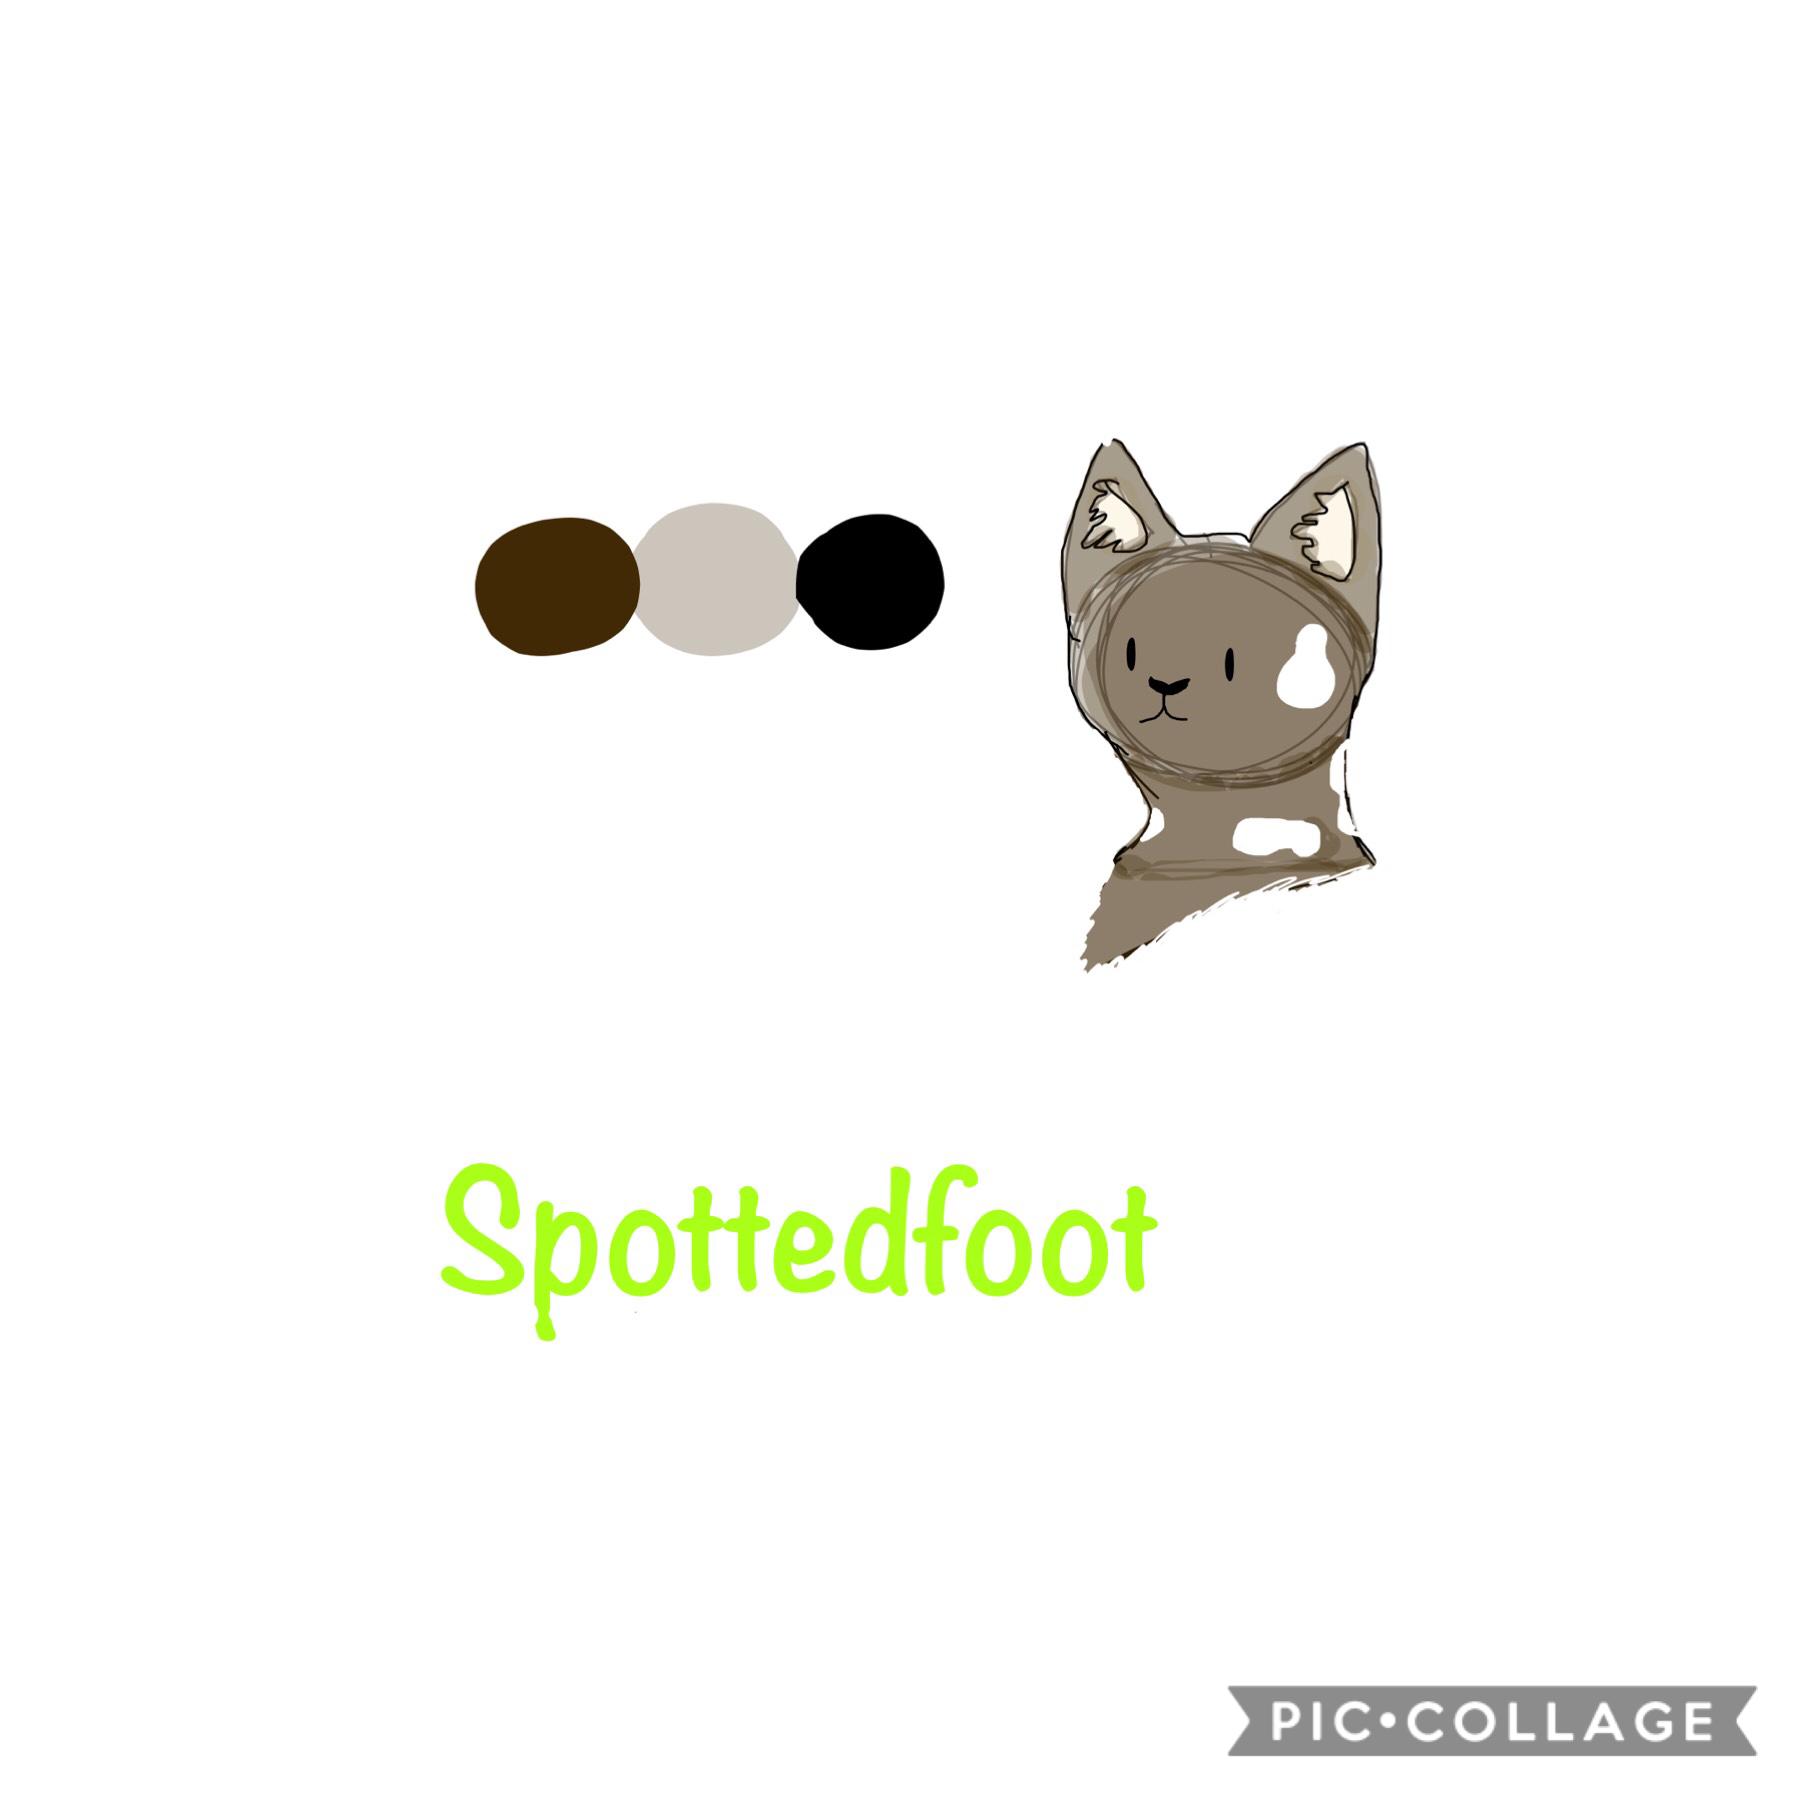 So um I thought I’d do a Warrior OC... and I had no time so it’s pretty bad but that’s ok
Spottedfoot is a large brown tabby tom with white paws. From RiverClan, and has roots in ThunderClan , with Brambleclaw as his great great grandfather.